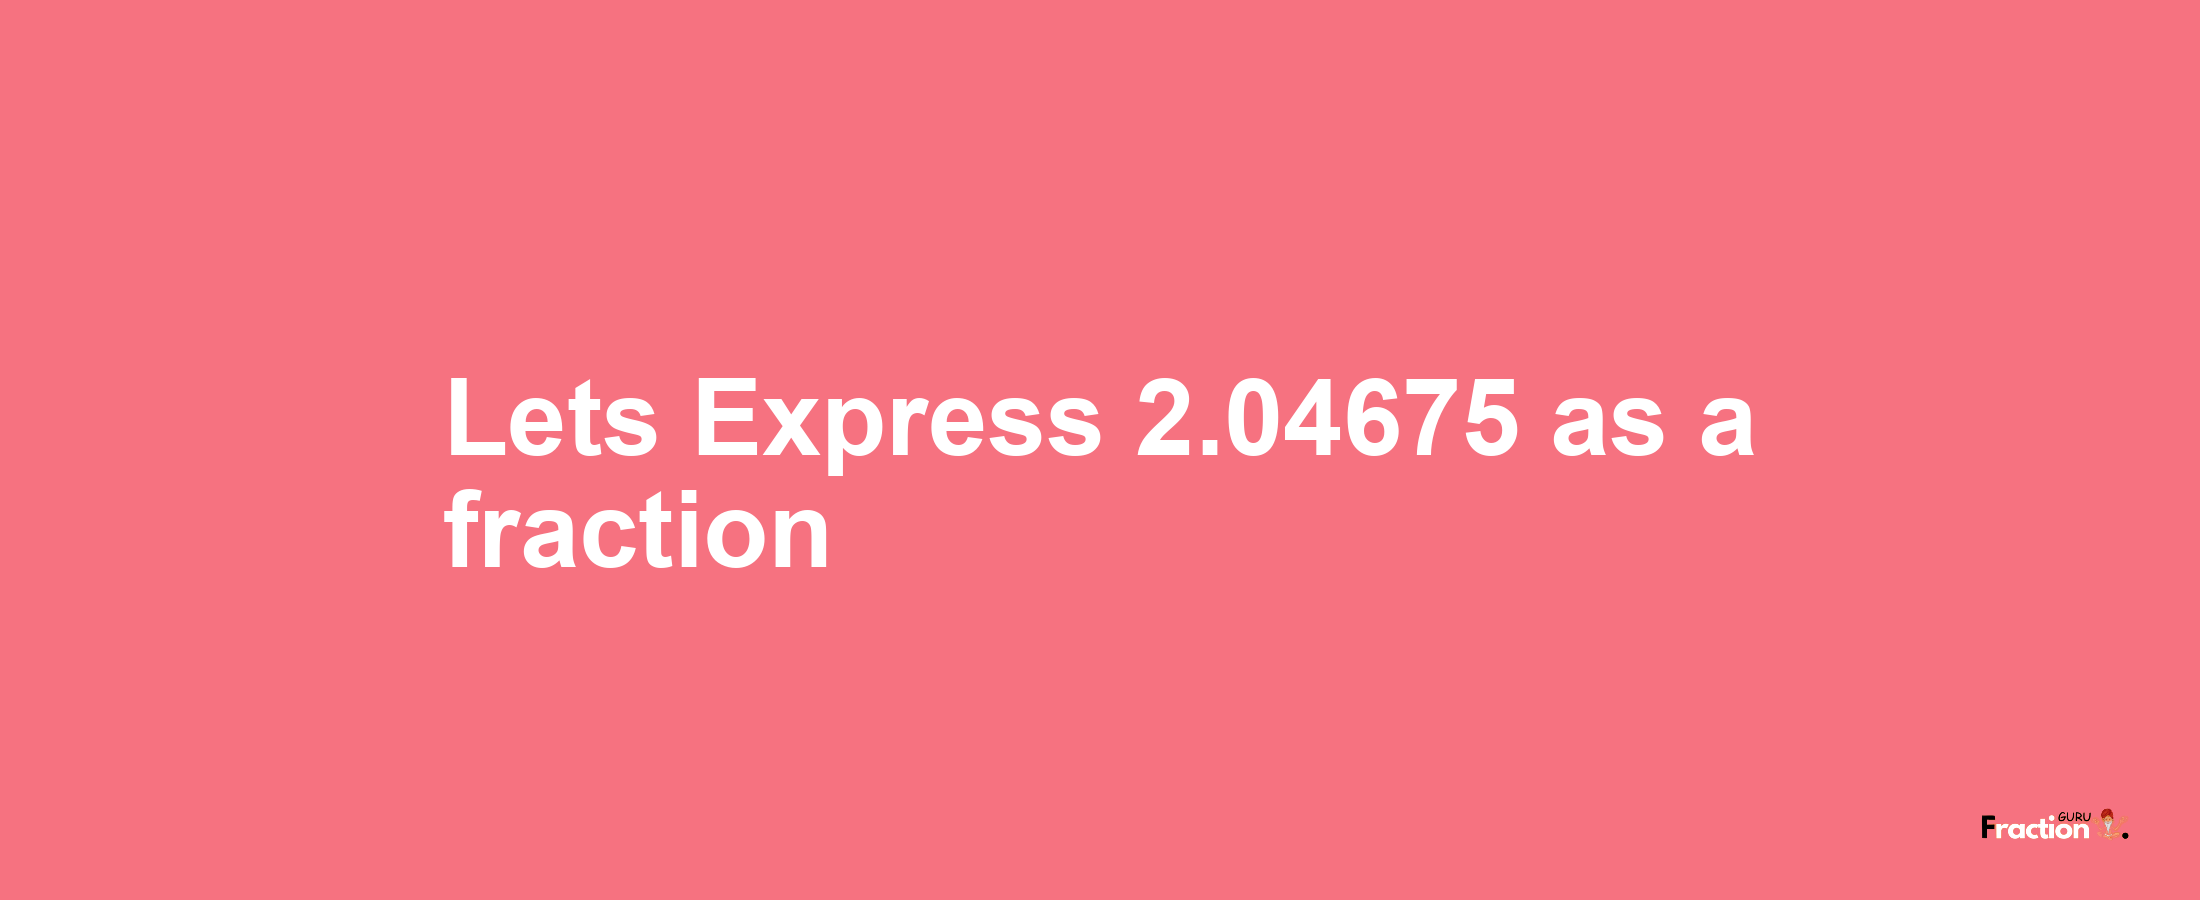 Lets Express 2.04675 as afraction